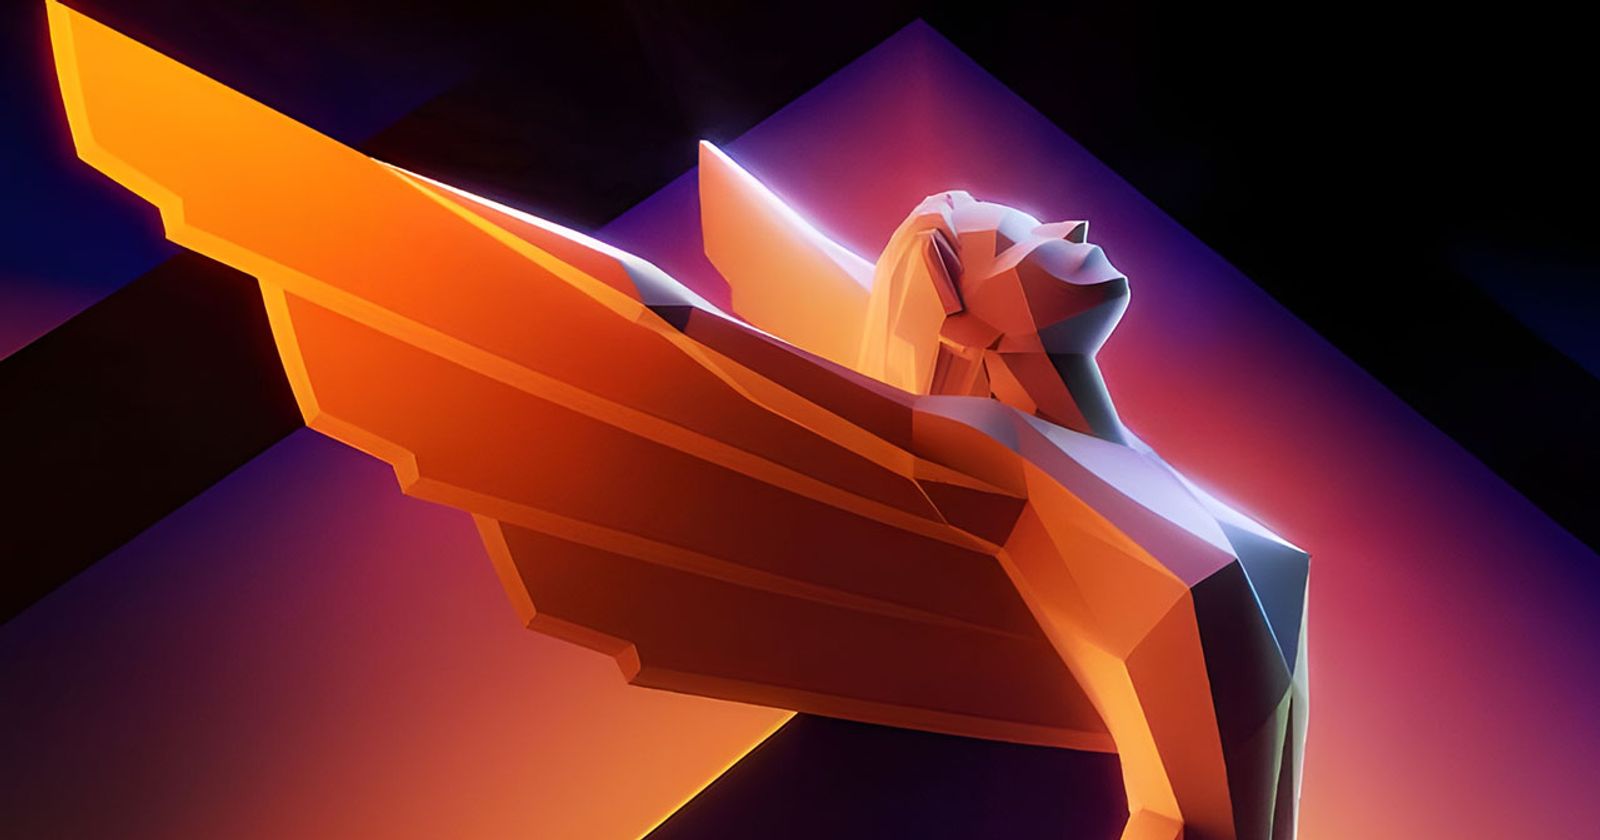 The Game Awards Players' Voice voting: How to vote, nominated games,  criteria, and more